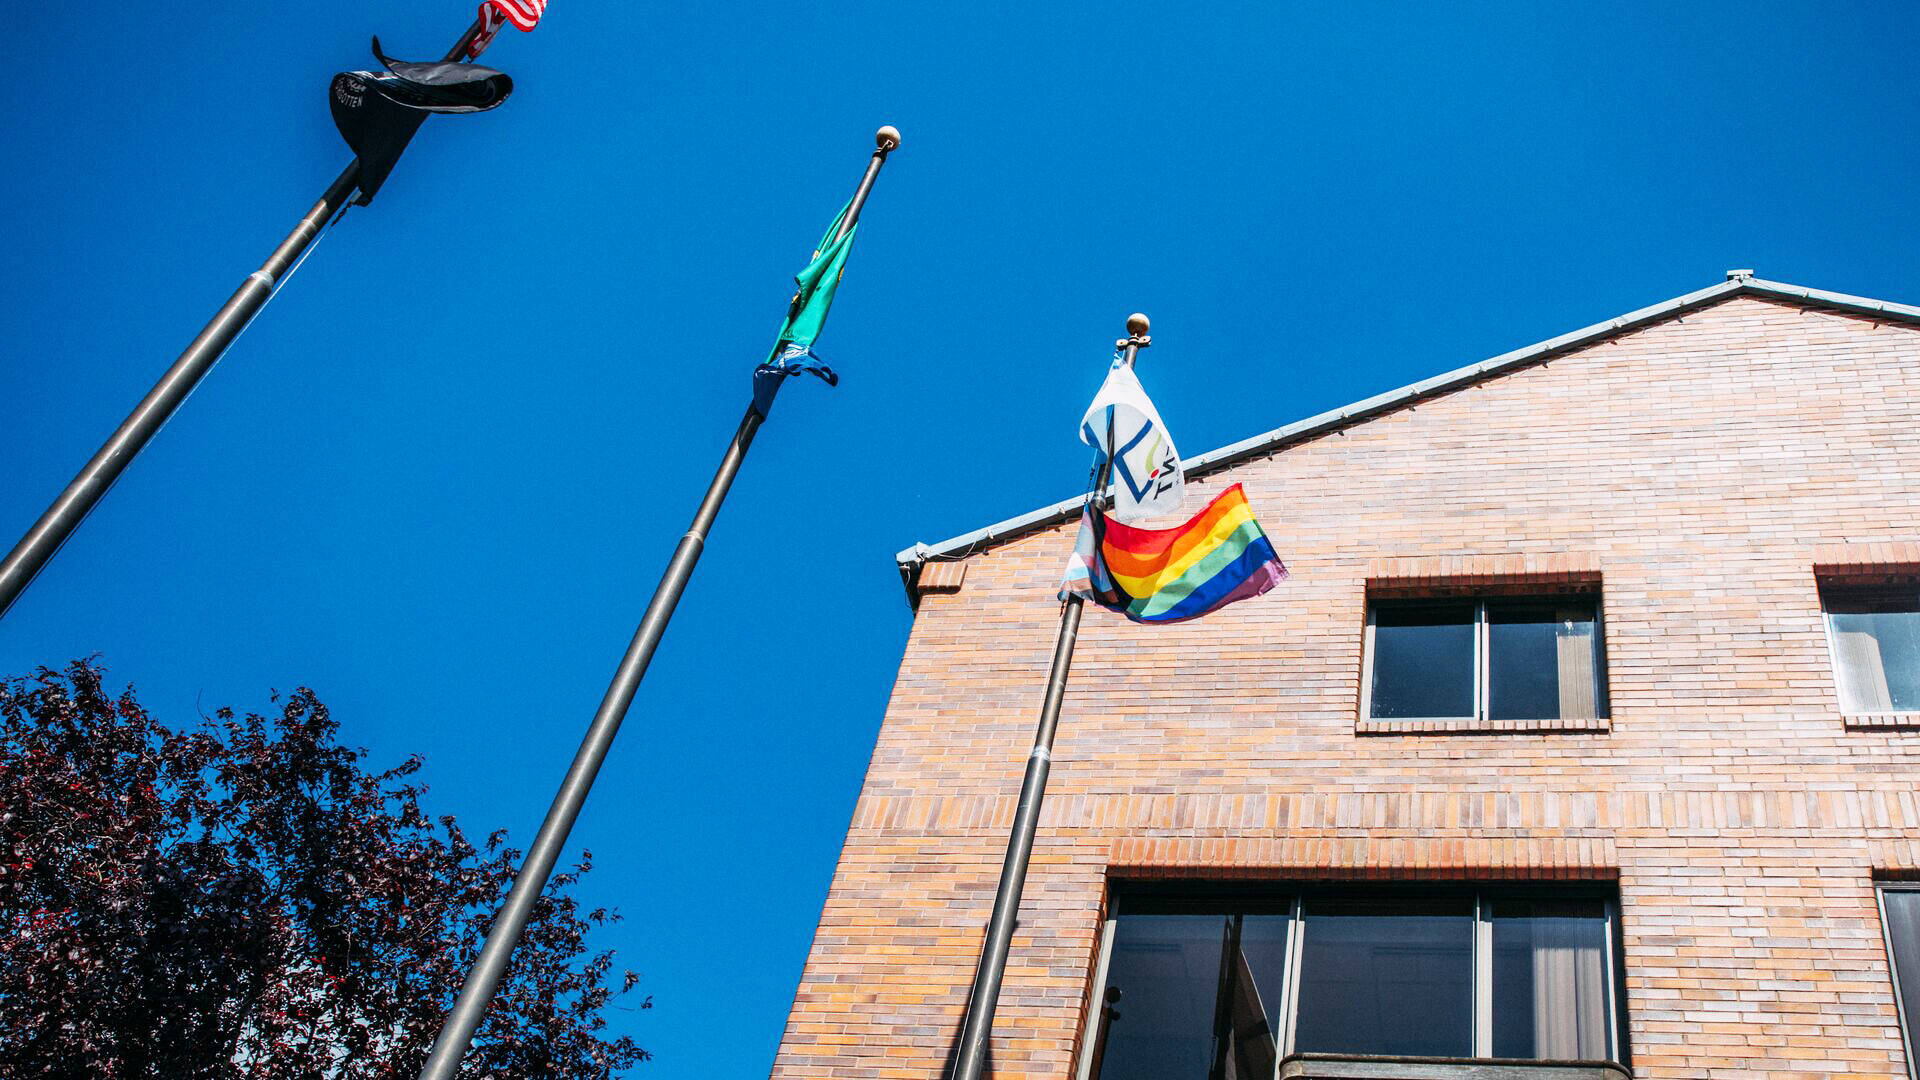 The Pride flag was raised June 1 at Kent City Hall. COURTESY PHOTO, City of Kent